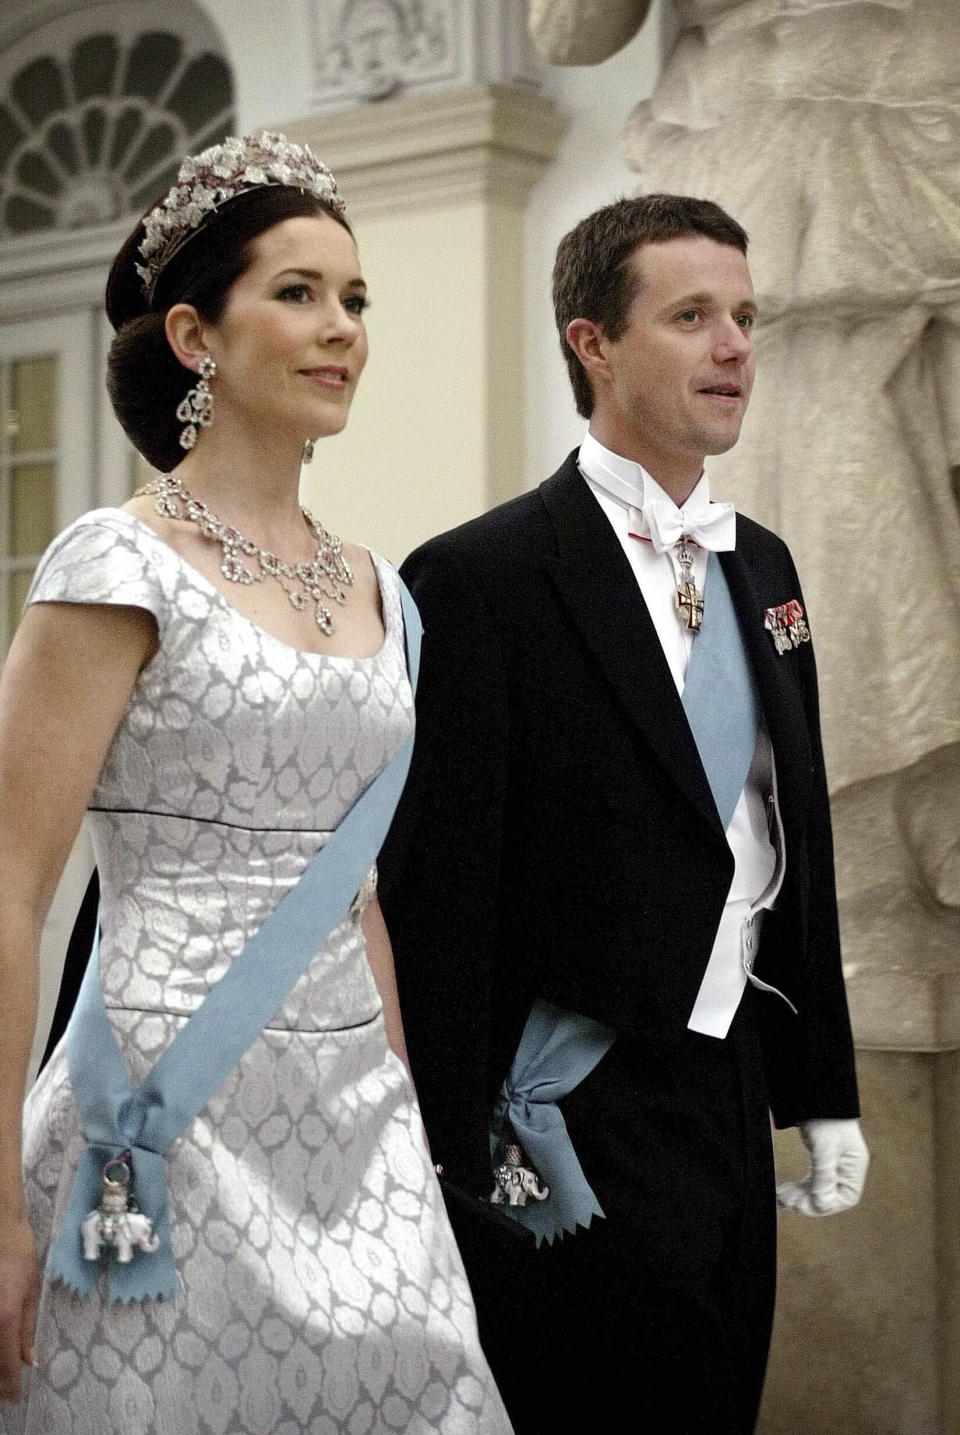 FILE - Mary Donaldson, soon to be crown princess, and Danish Crown Prince Frederik arrive at Christiansborg castle Wednesday May 11, 2004, to attend the banquet for Danish dignitaries kicking off official wedding celebrations in Denmark. As a teenager, Crown Prince Frederik felt uncomfortable being in the spotlight, and pondered whether there was any way he could avoid becoming king. All doubts have been swept aside as the 55-year-old takes over the crown on Sunday, Jan. 14, 2024 from his mother, Queen Margrethe II, who is breaking with centuries of Danish royal tradition and retiring after a 52-year reign. (Thomas Wilmann/Ritzau Scanpix via AP, File)